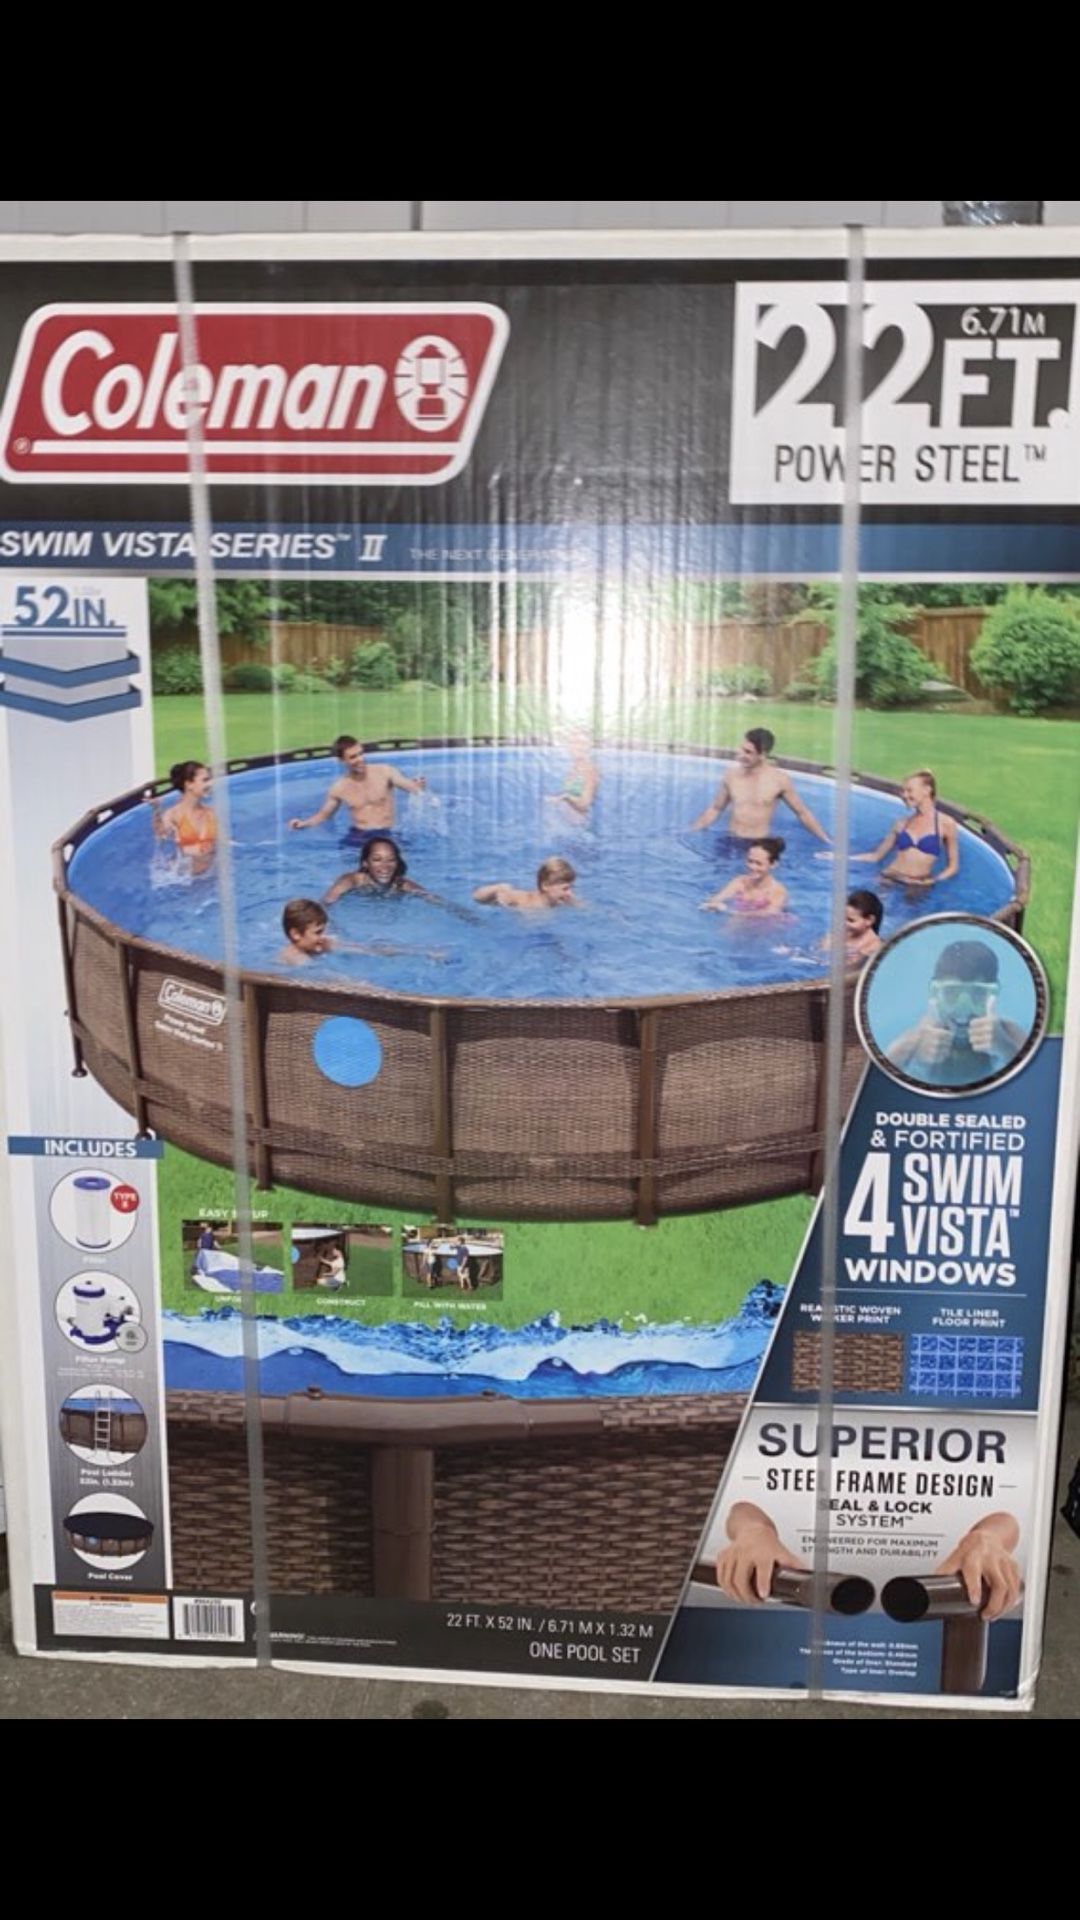 Coleman swimming pool 22’ x 52in